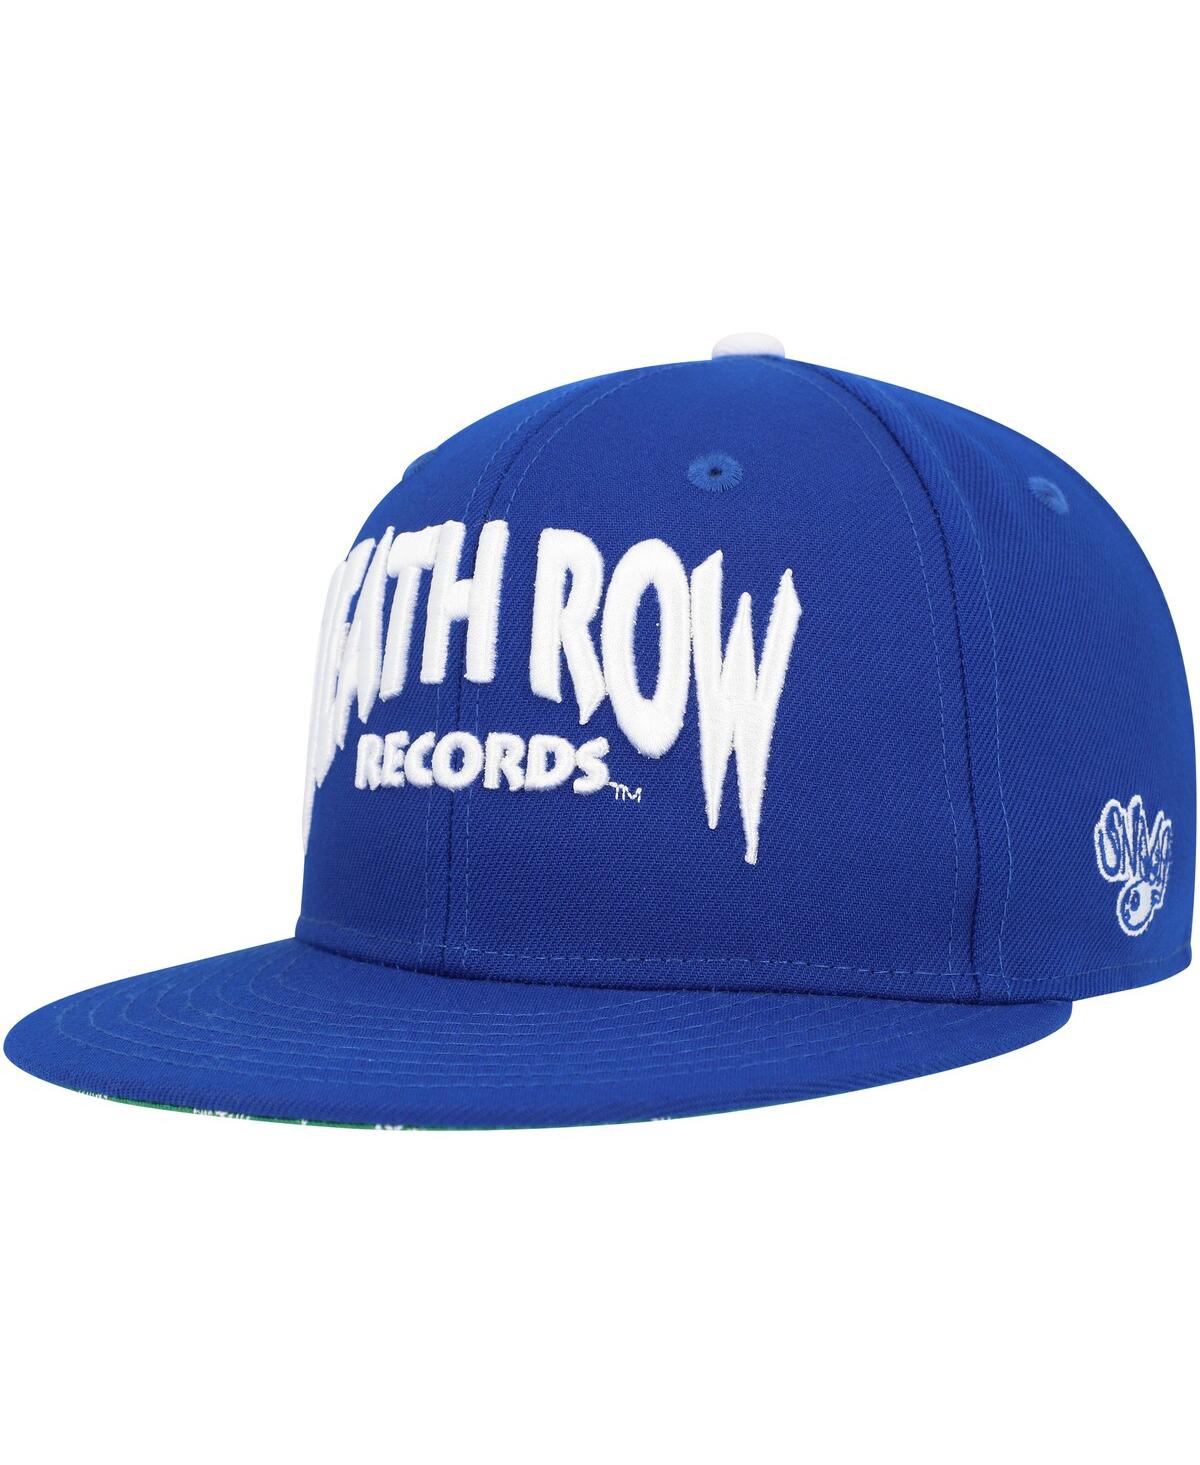 Men's Royal Death Row Records Paisley Fitted Hat - Royal